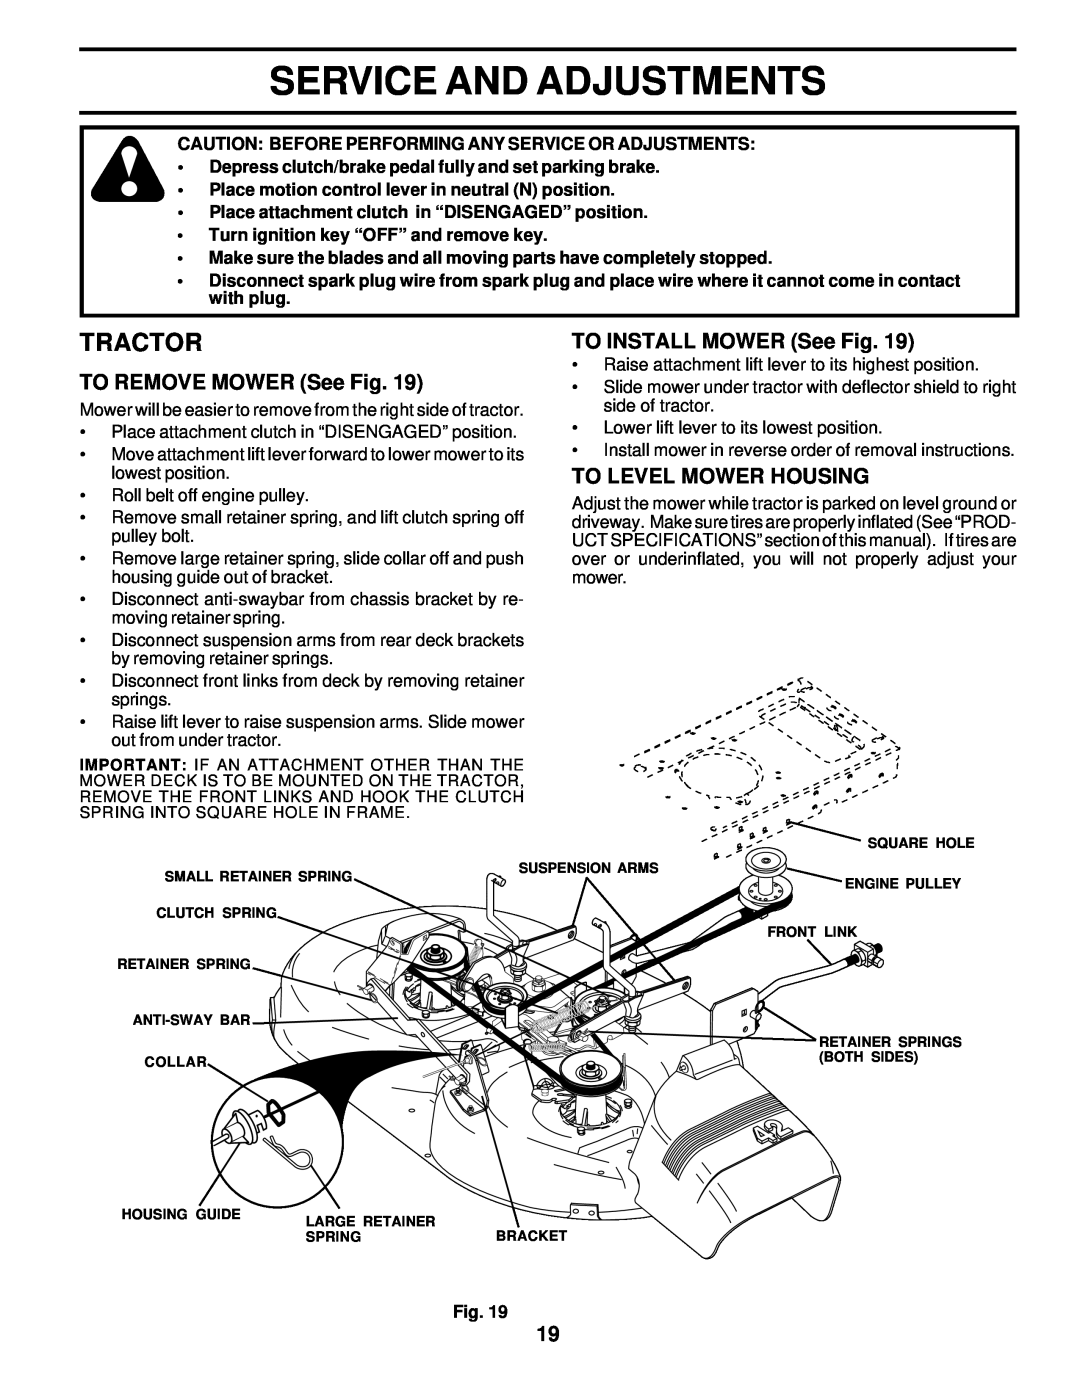 Poulan 177029 Service And Adjustments, TO REMOVE MOWER See Fig, TO INSTALL MOWER See Fig, To Level Mower Housing, Tractor 